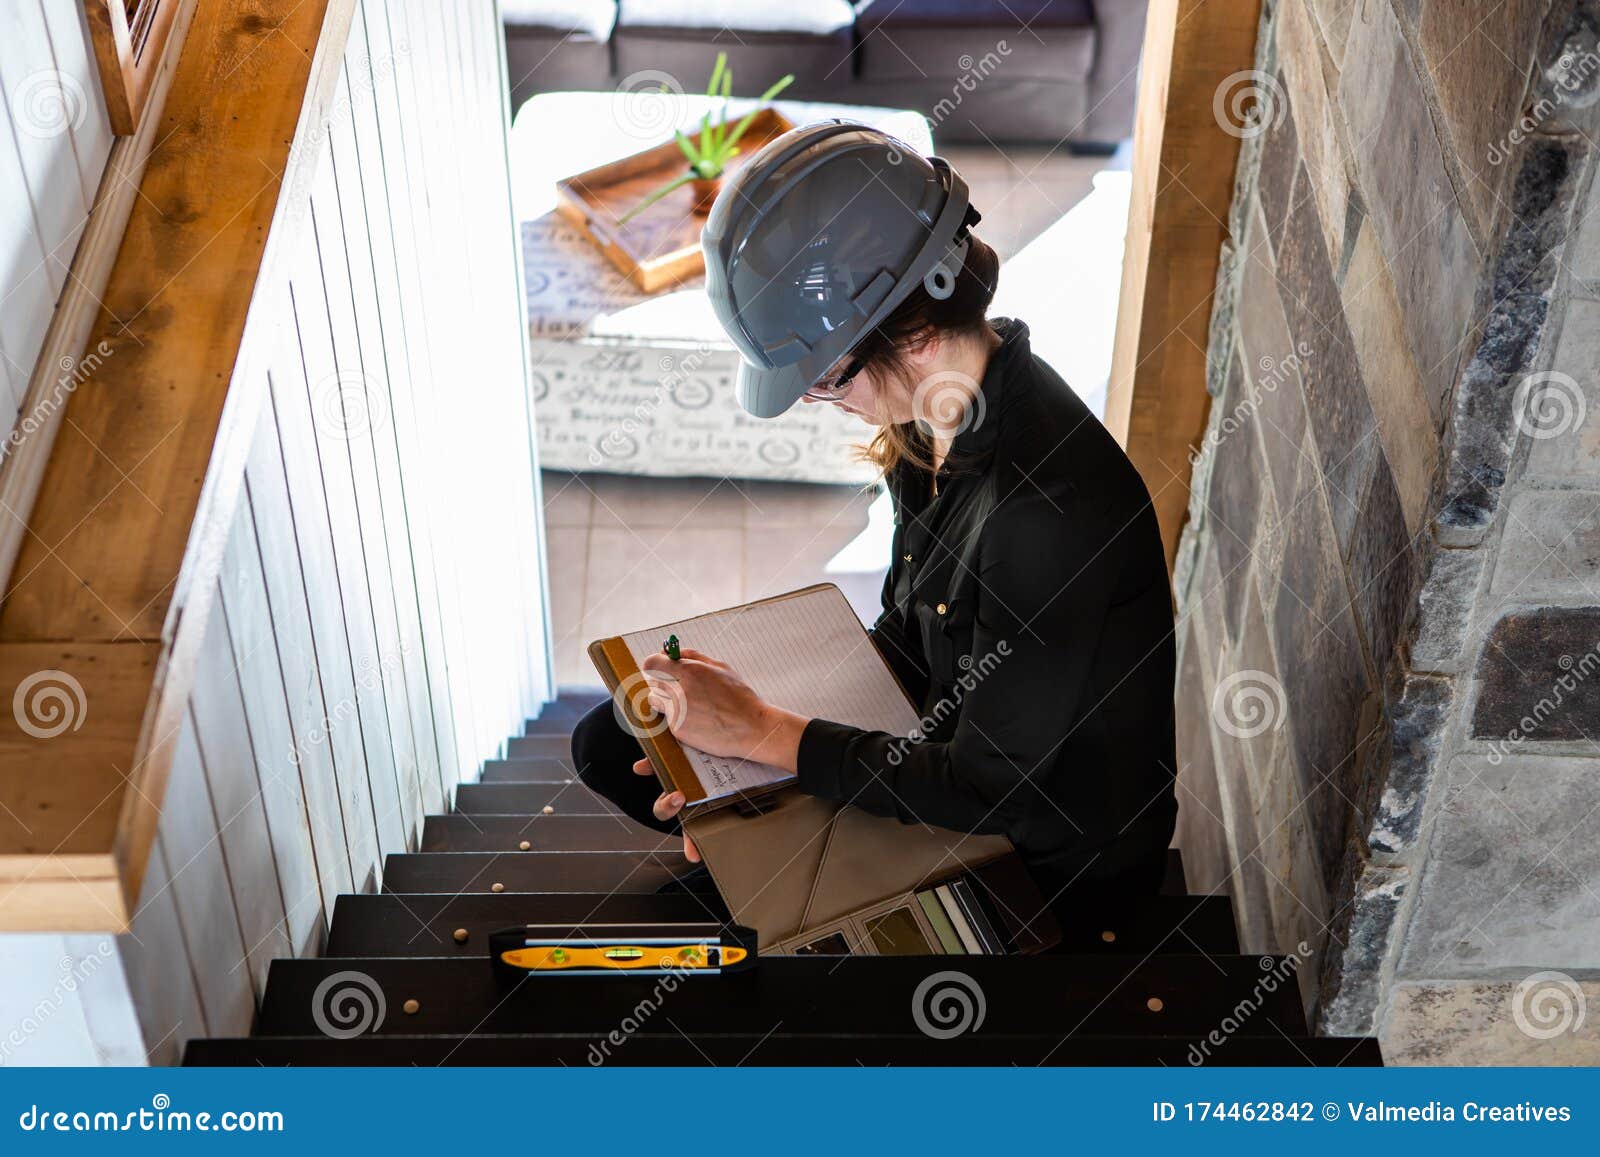 woman inspector reviewing stairs